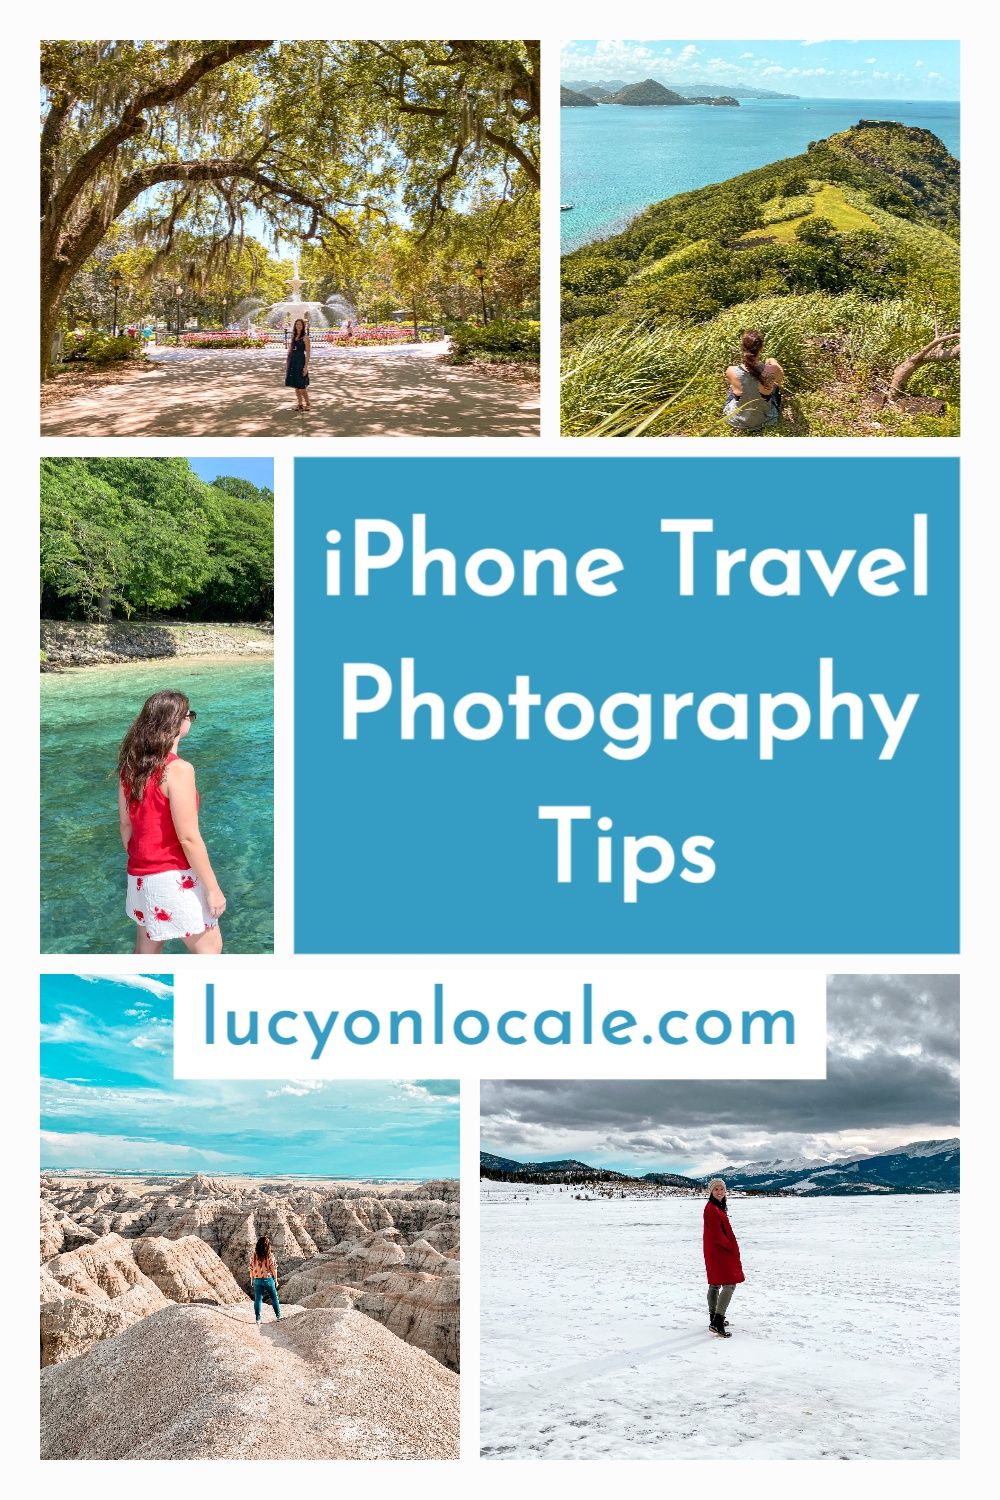 iPhone travel photography tips